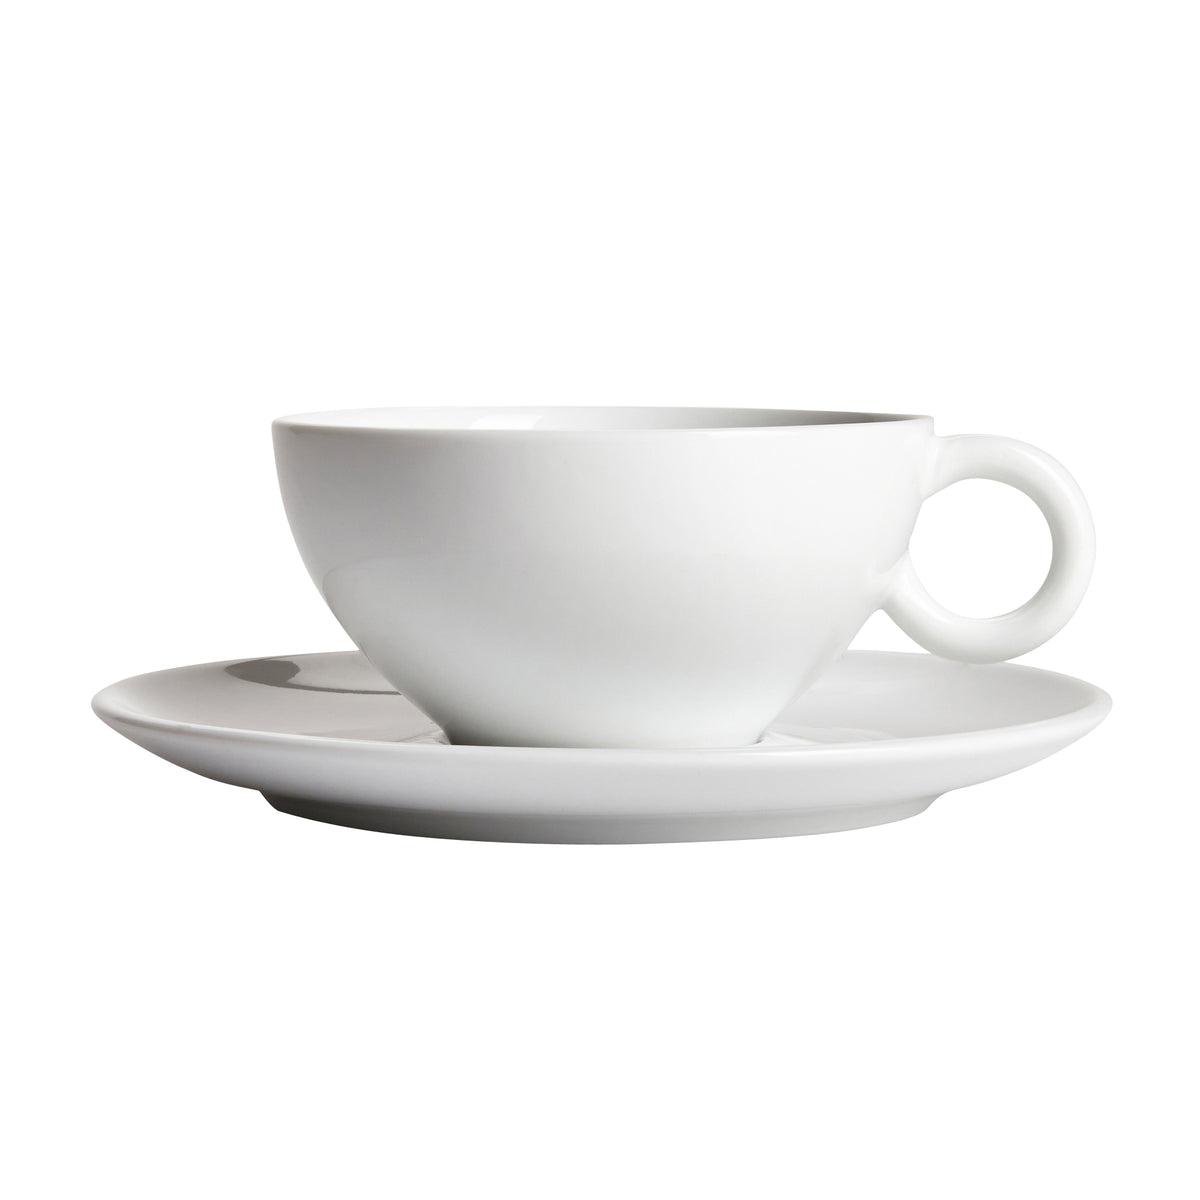 Moa White Cup with Saucer